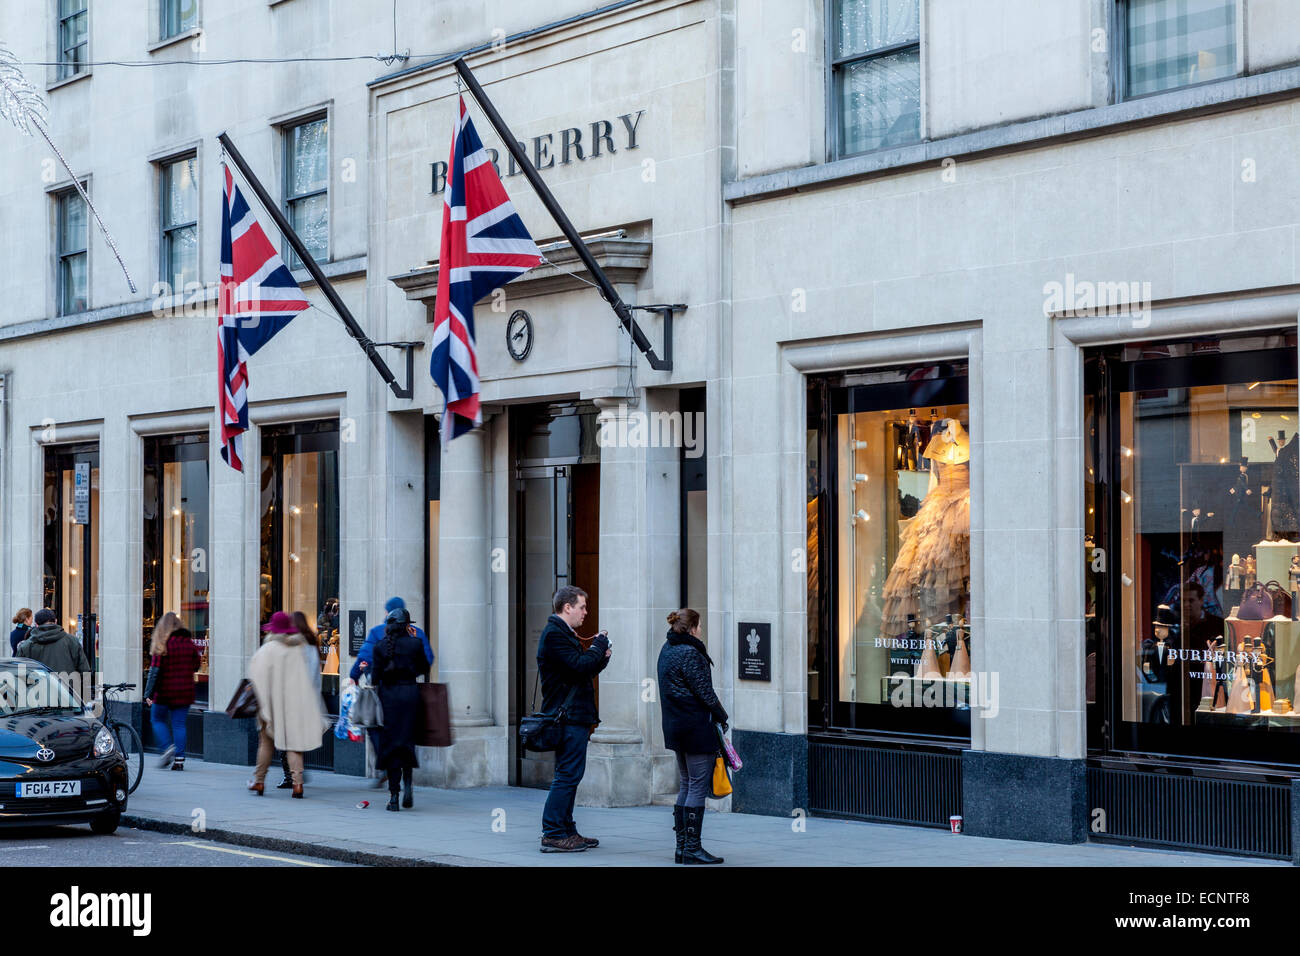 The Burberry Store In New Bond Street, London, England Stock Photo